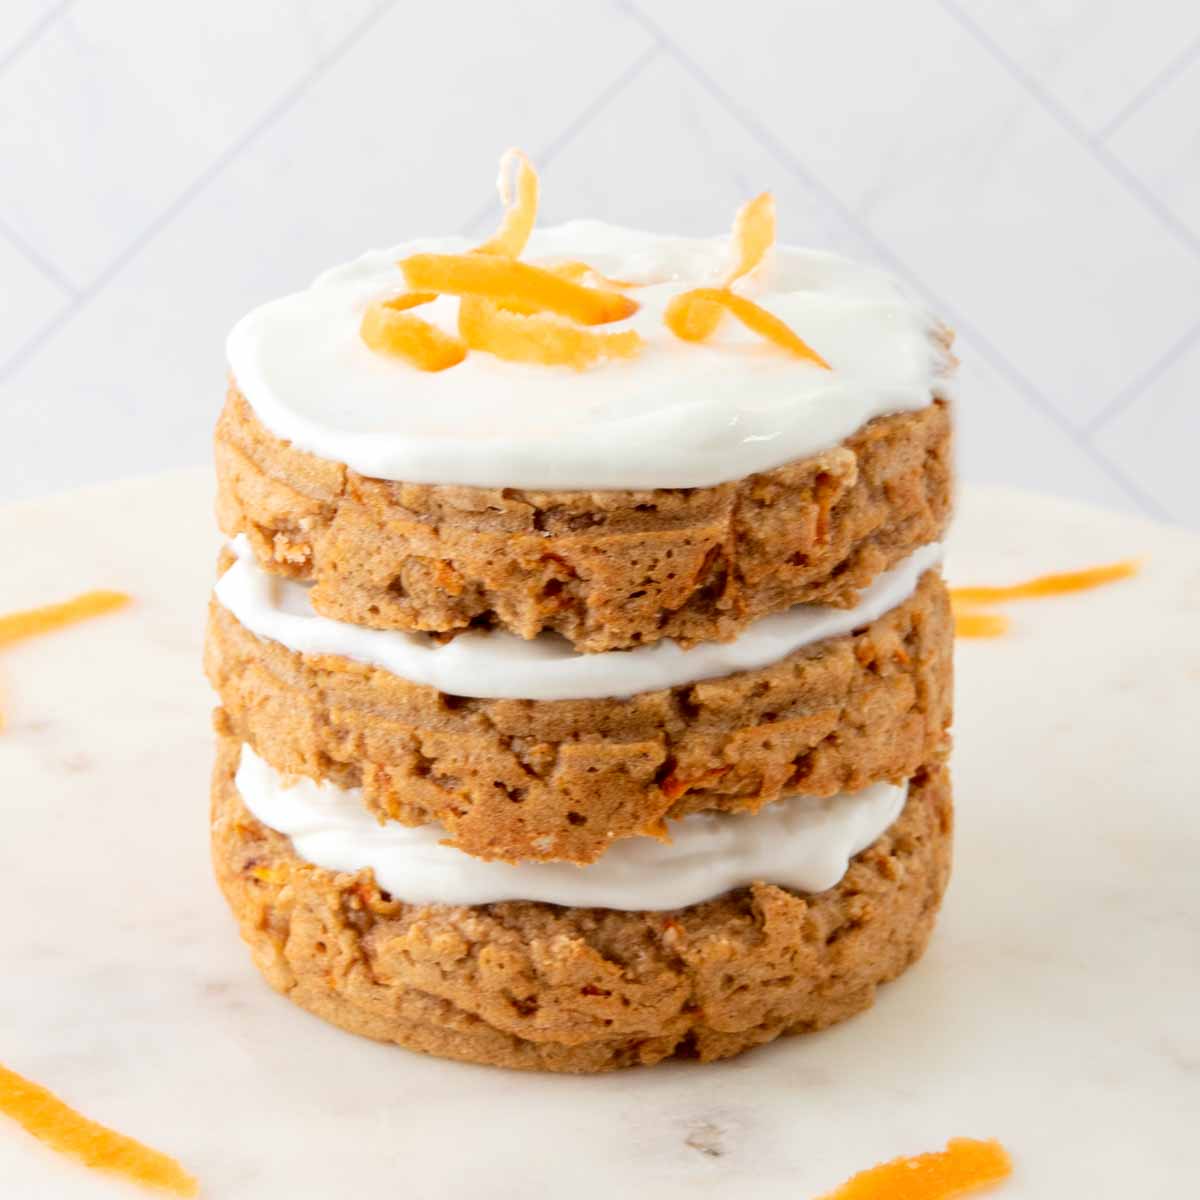 Carrot cake for dogs with yogurt frosting.